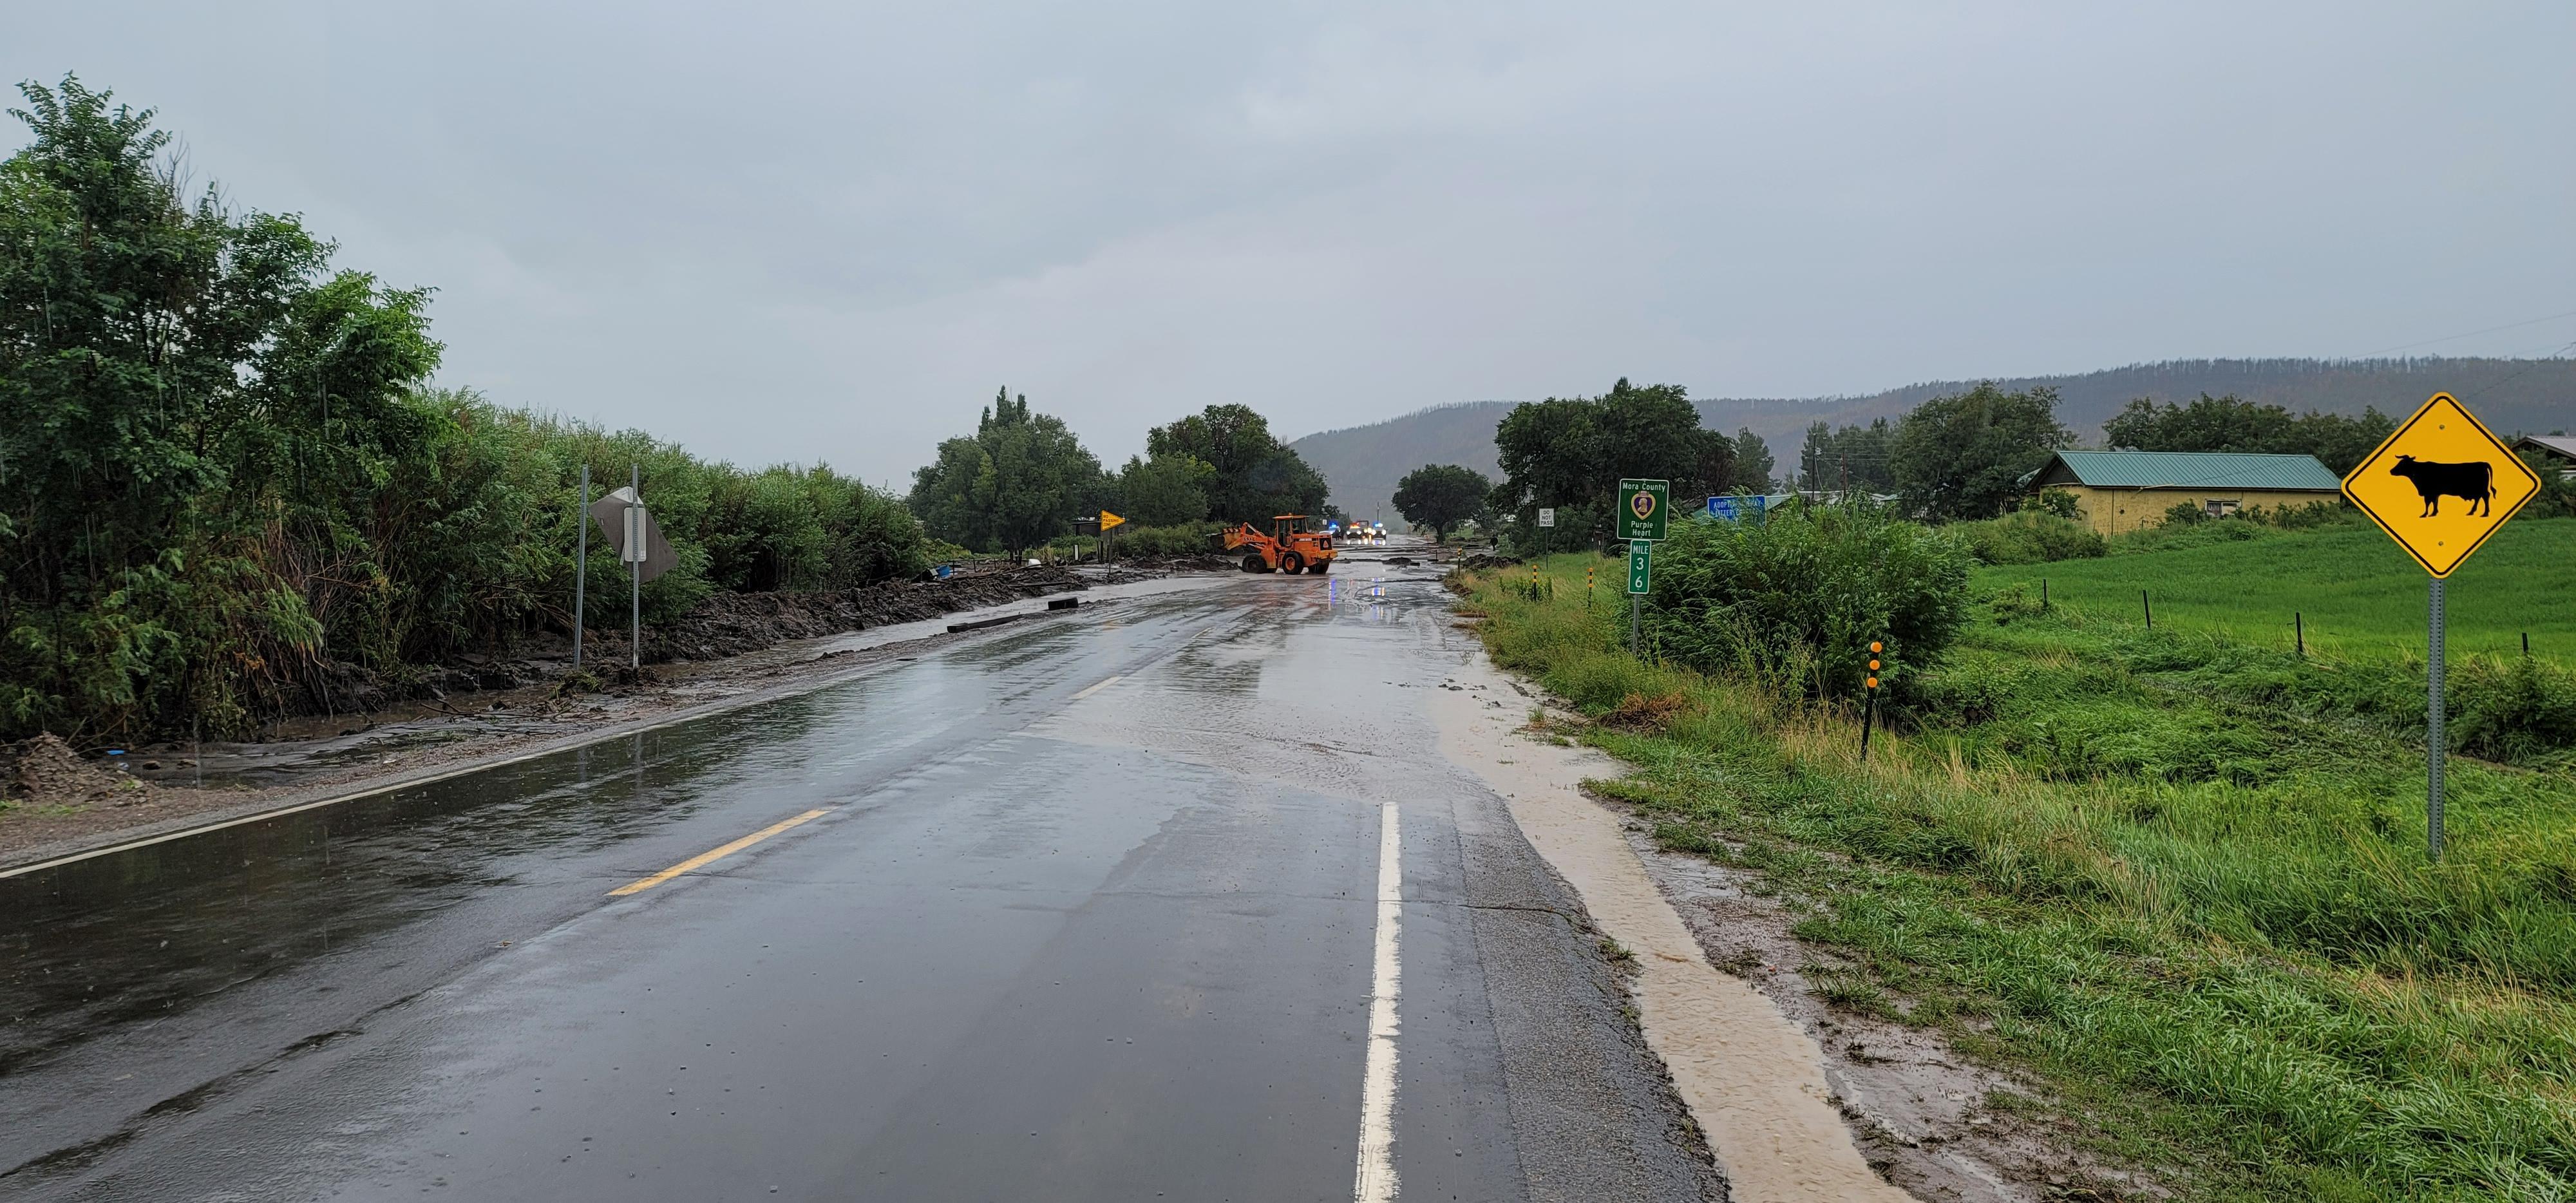 A front end loader removes flood debris from a road near  mile marker 36 in North Repair Group 08-08-22 